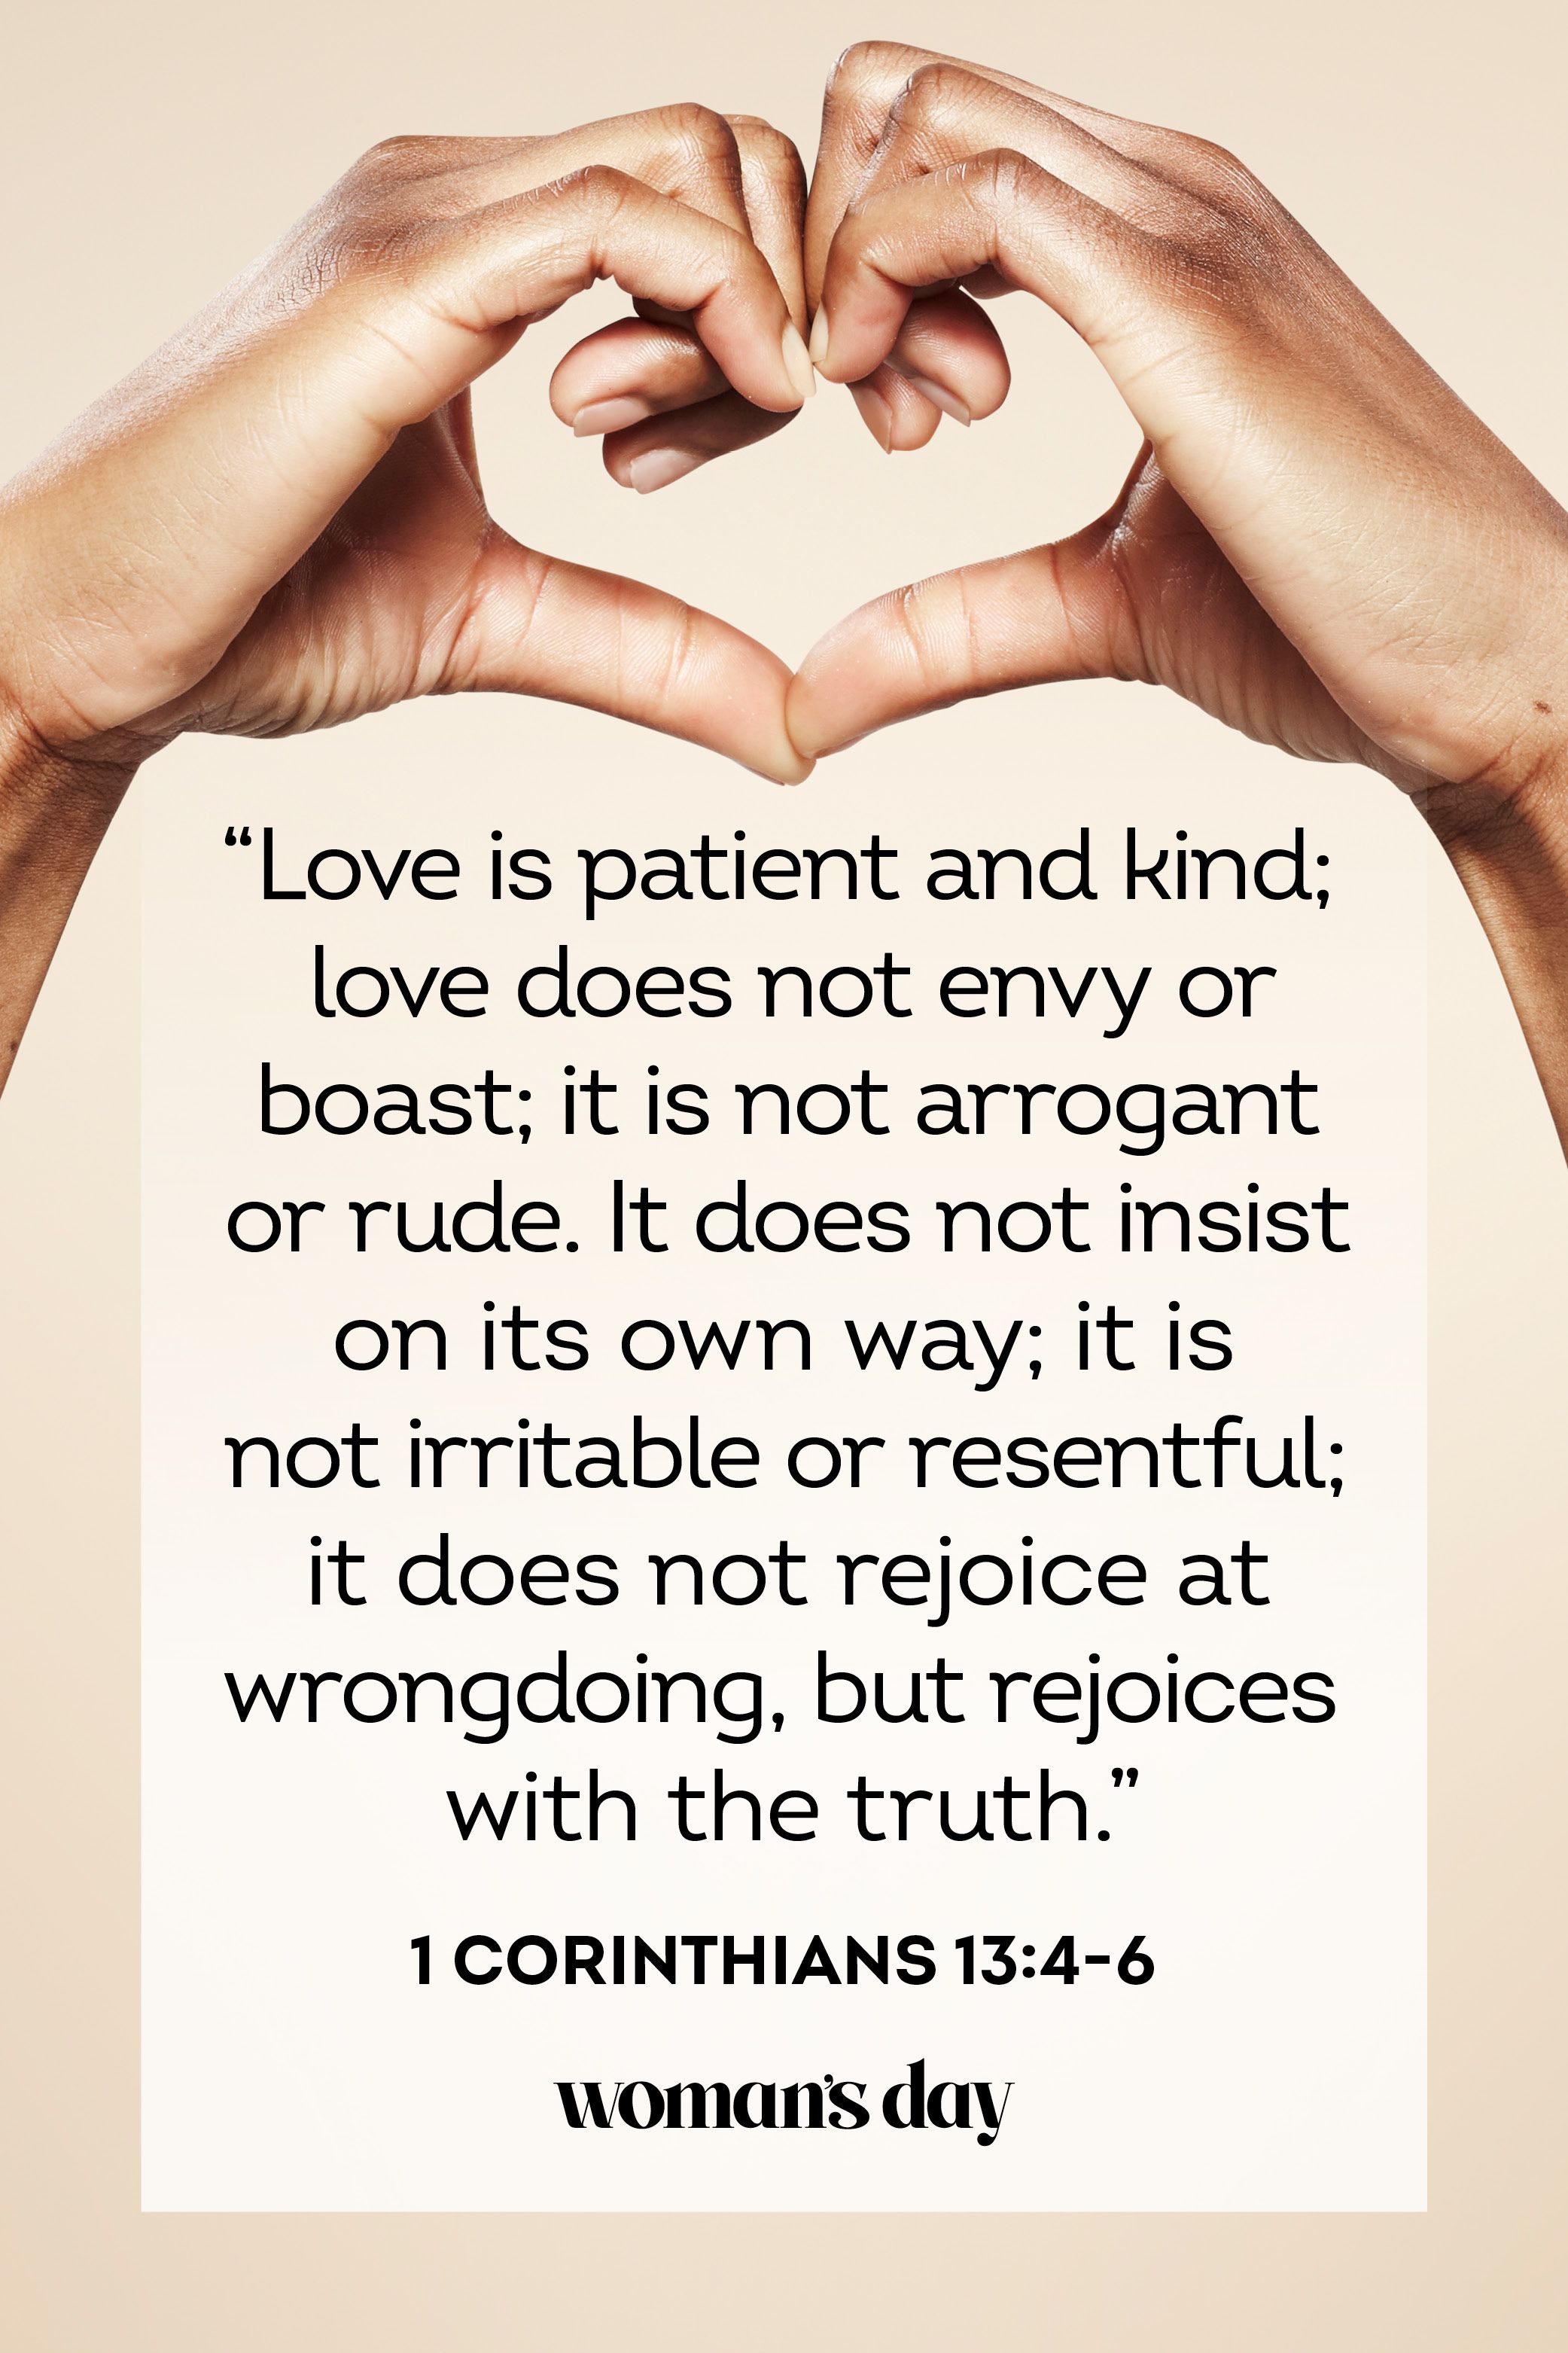 truth of love quotes